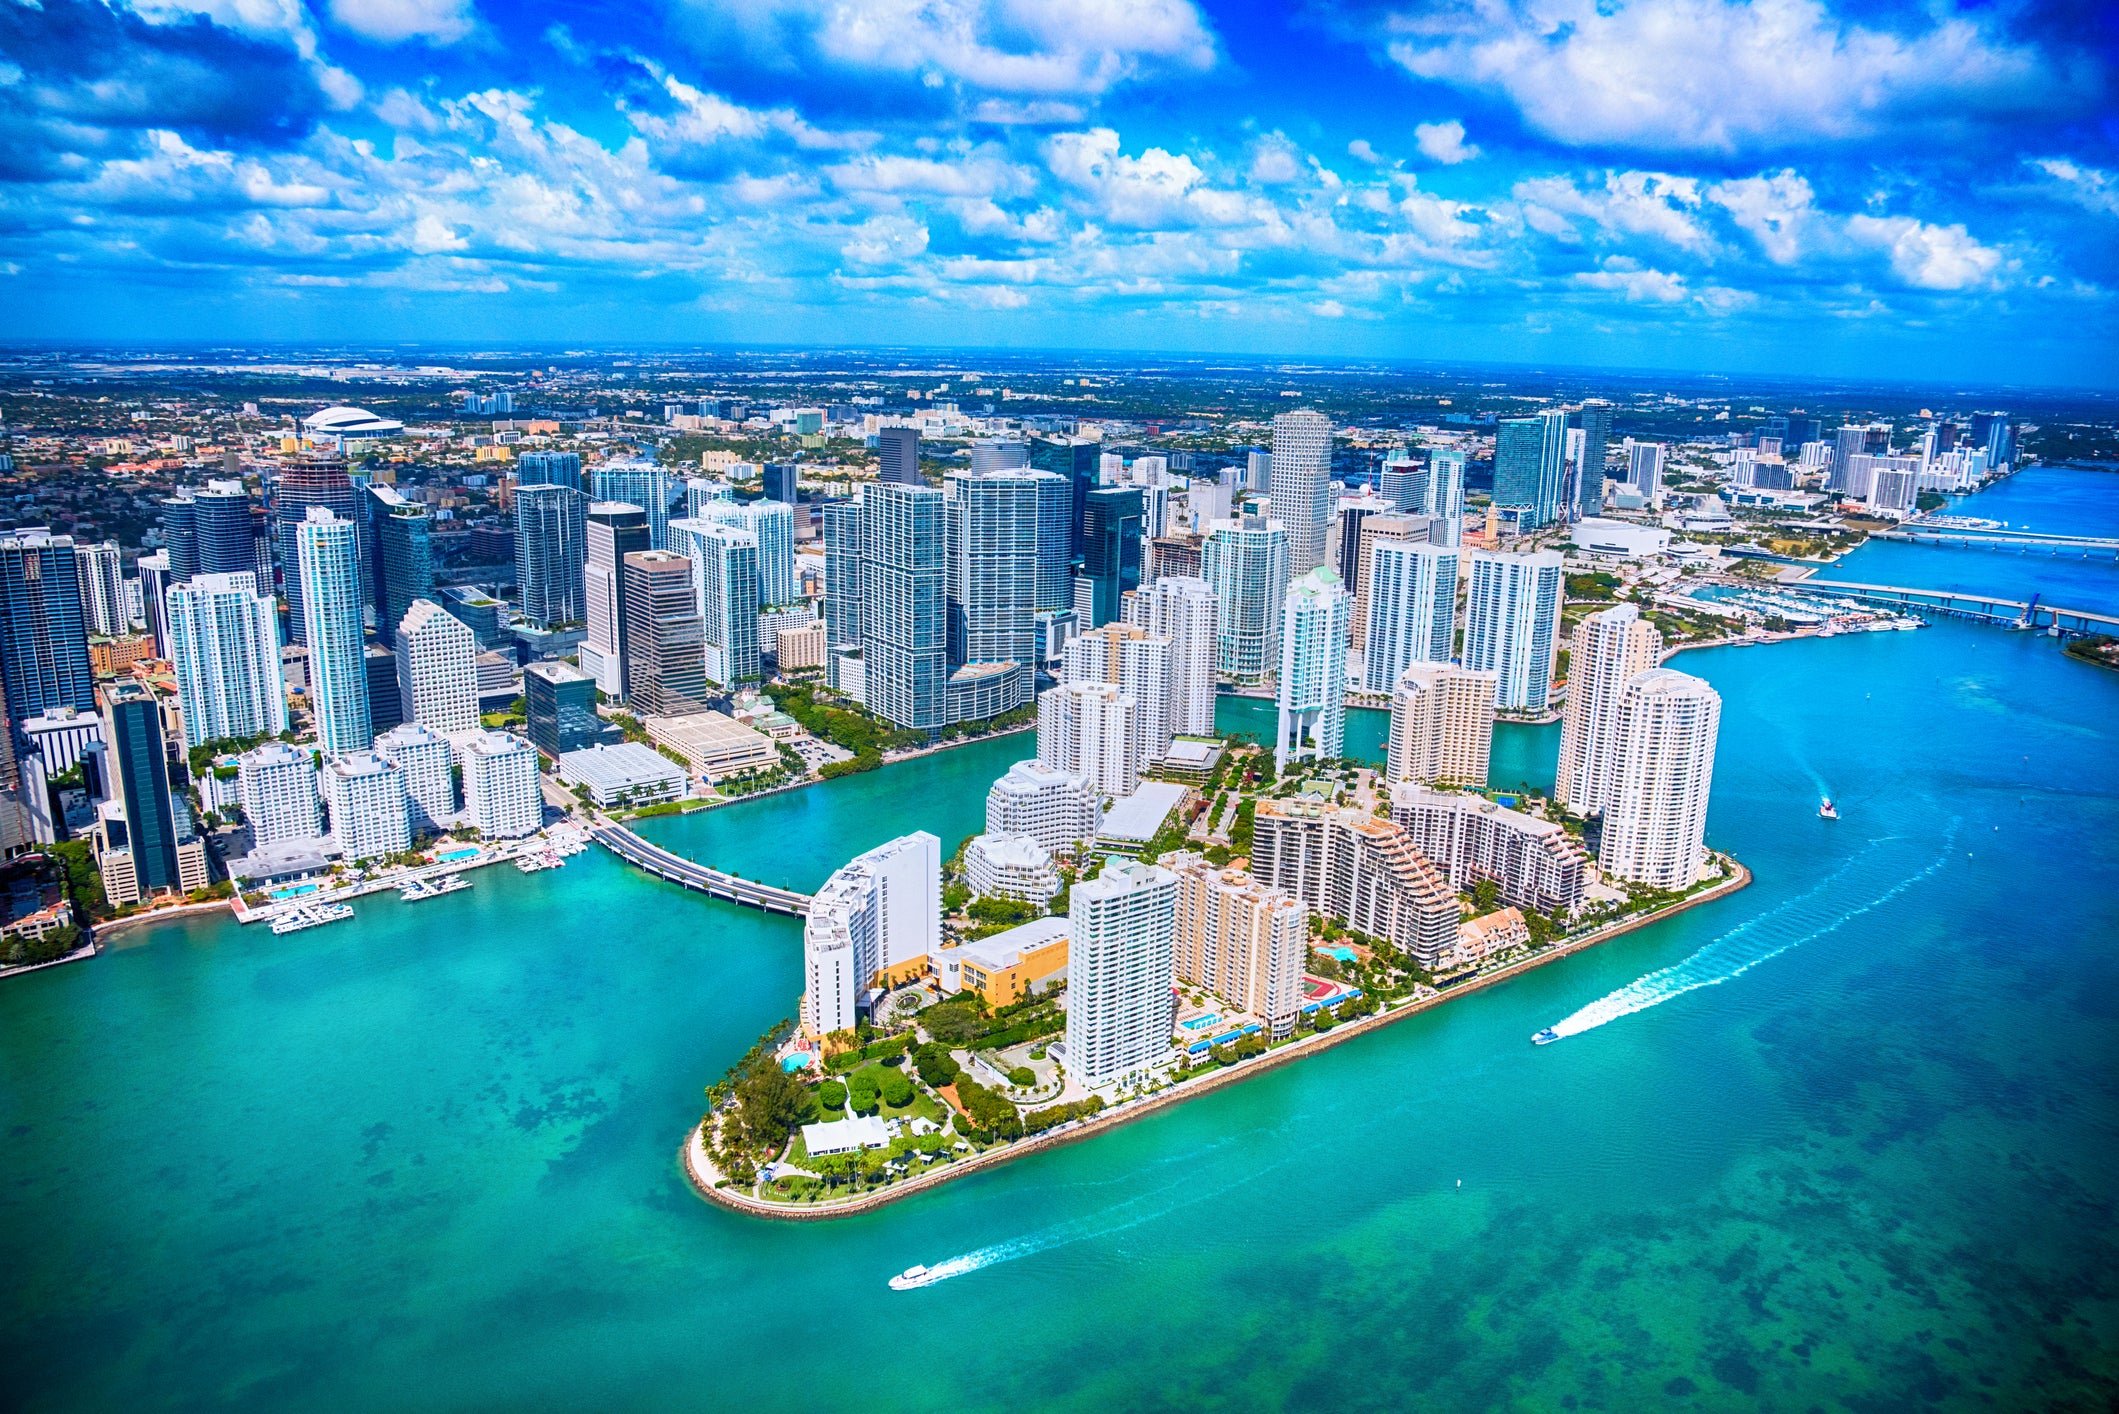 Miami cruise port guide Everything to know about hotels, sites